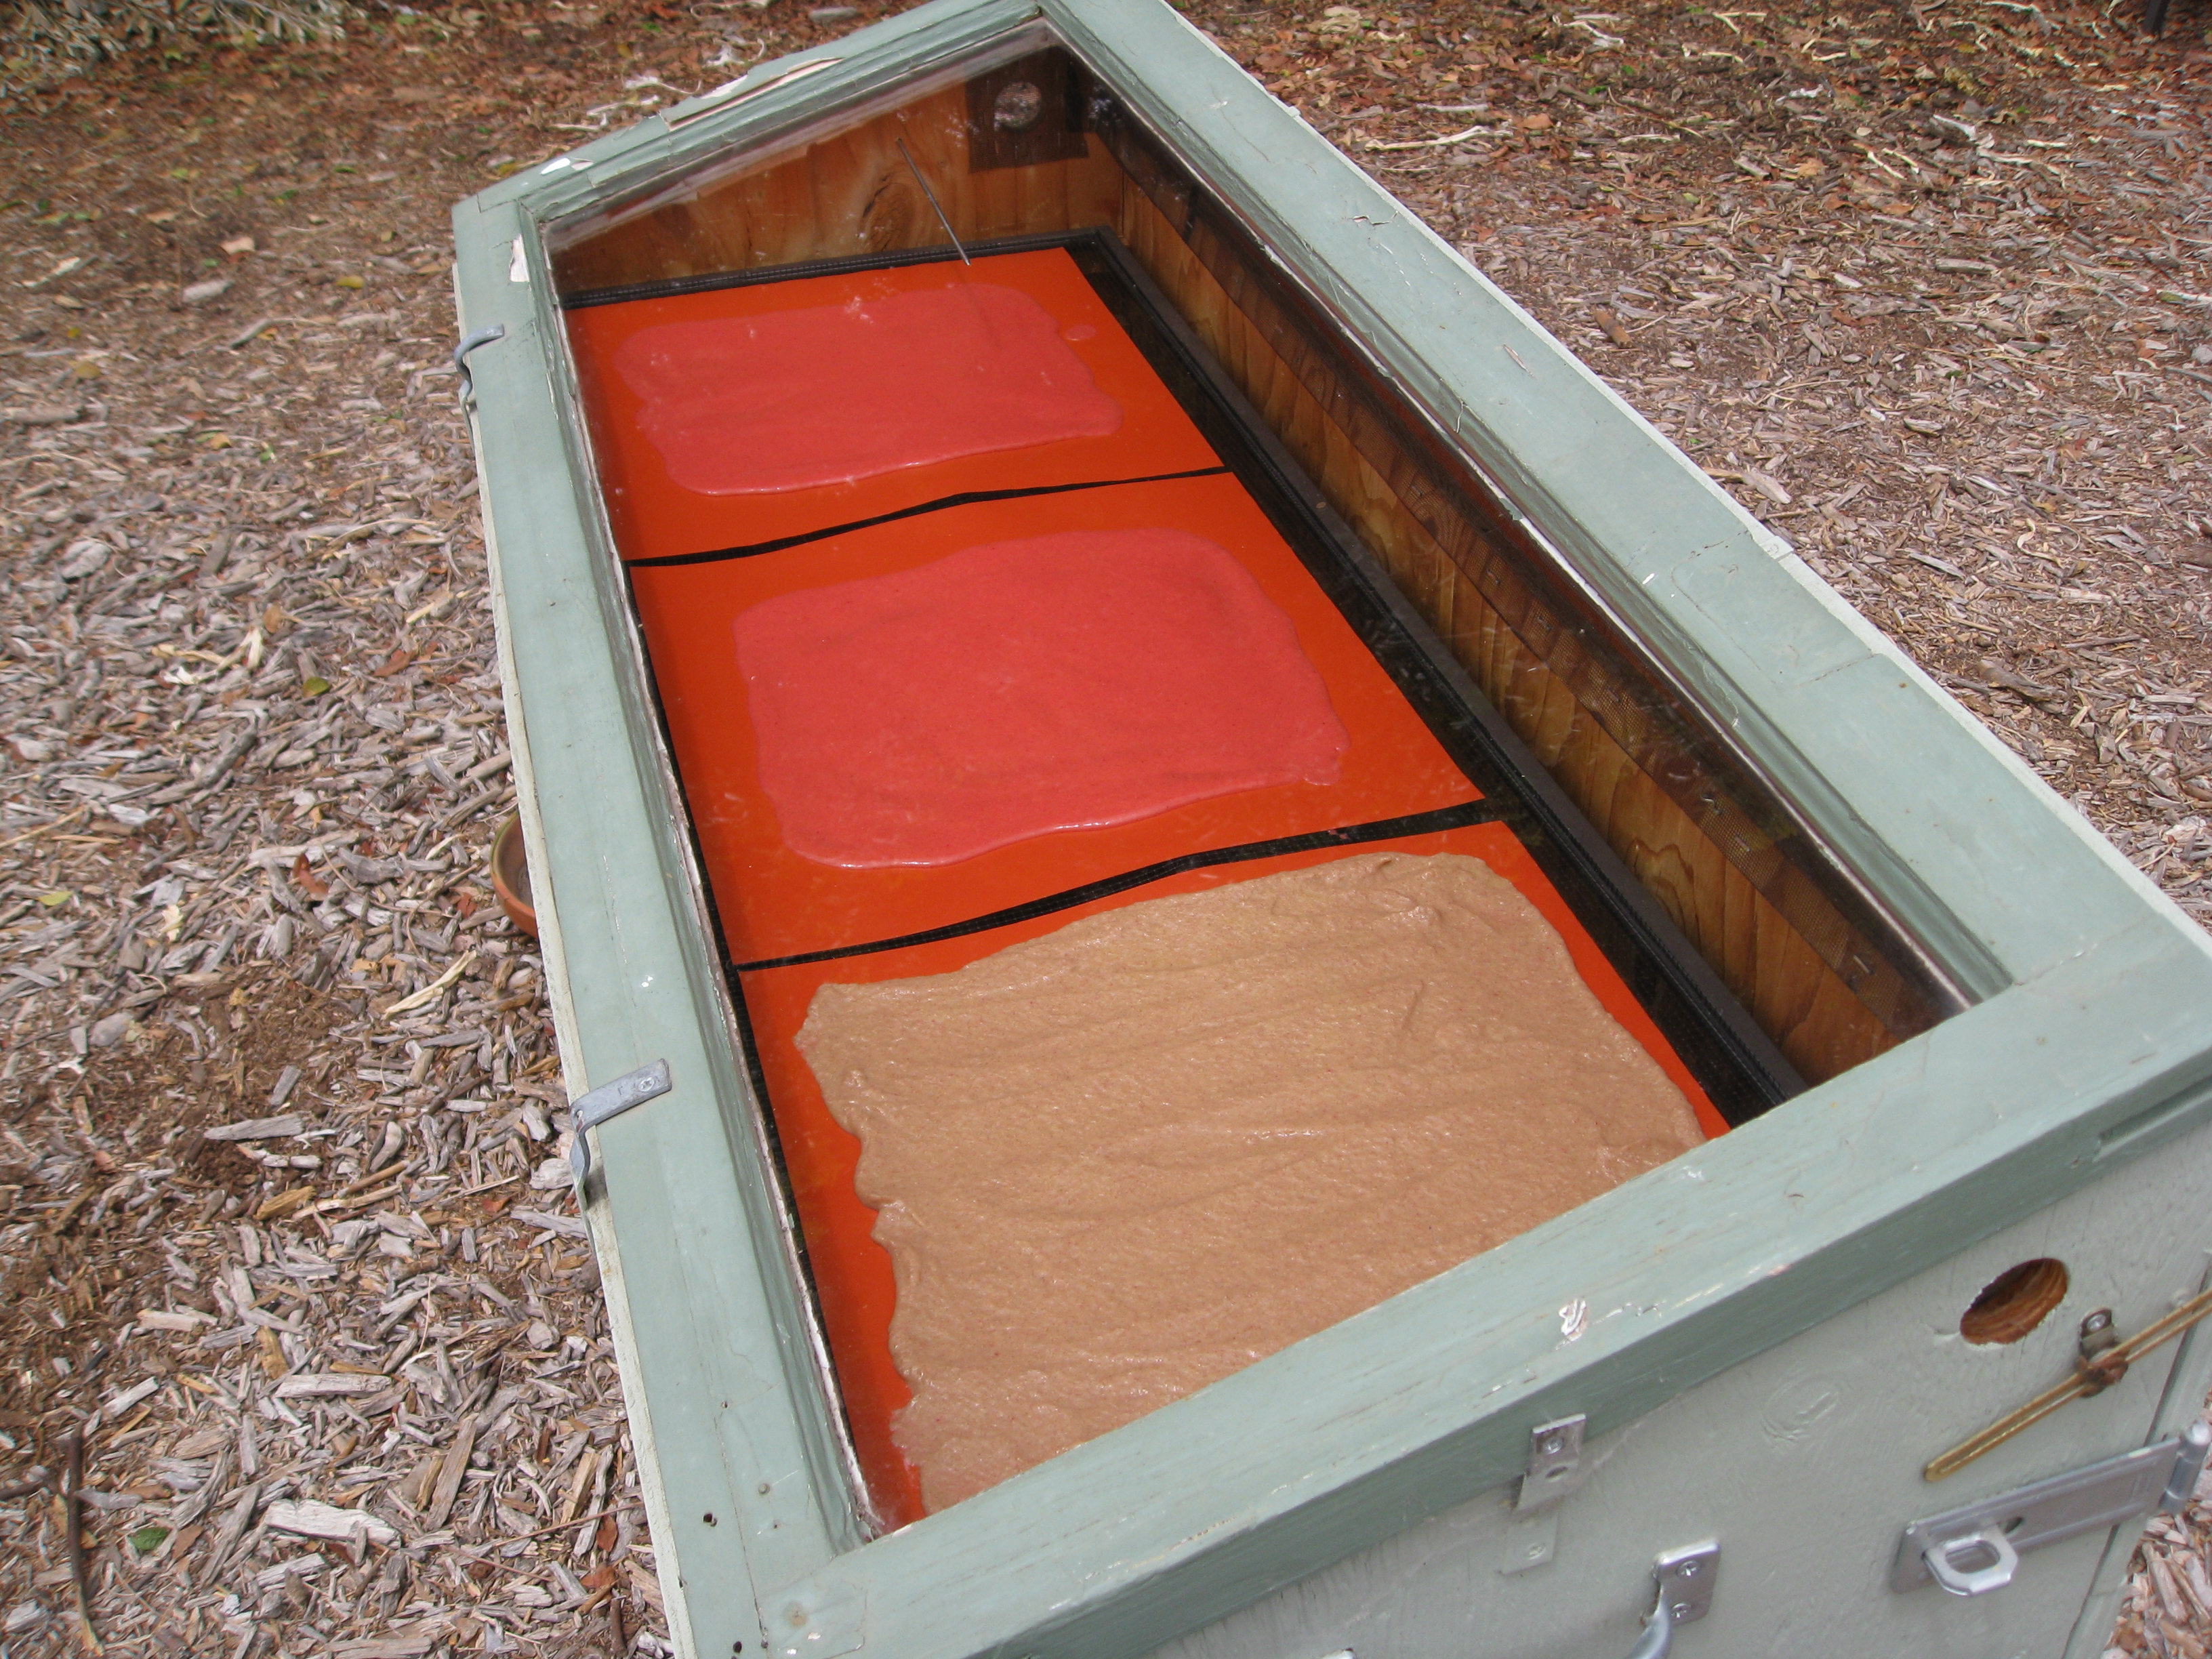 2 sheets of strawberry and 1 sheet of apple cinnamon fruit leather in the solar food dryer